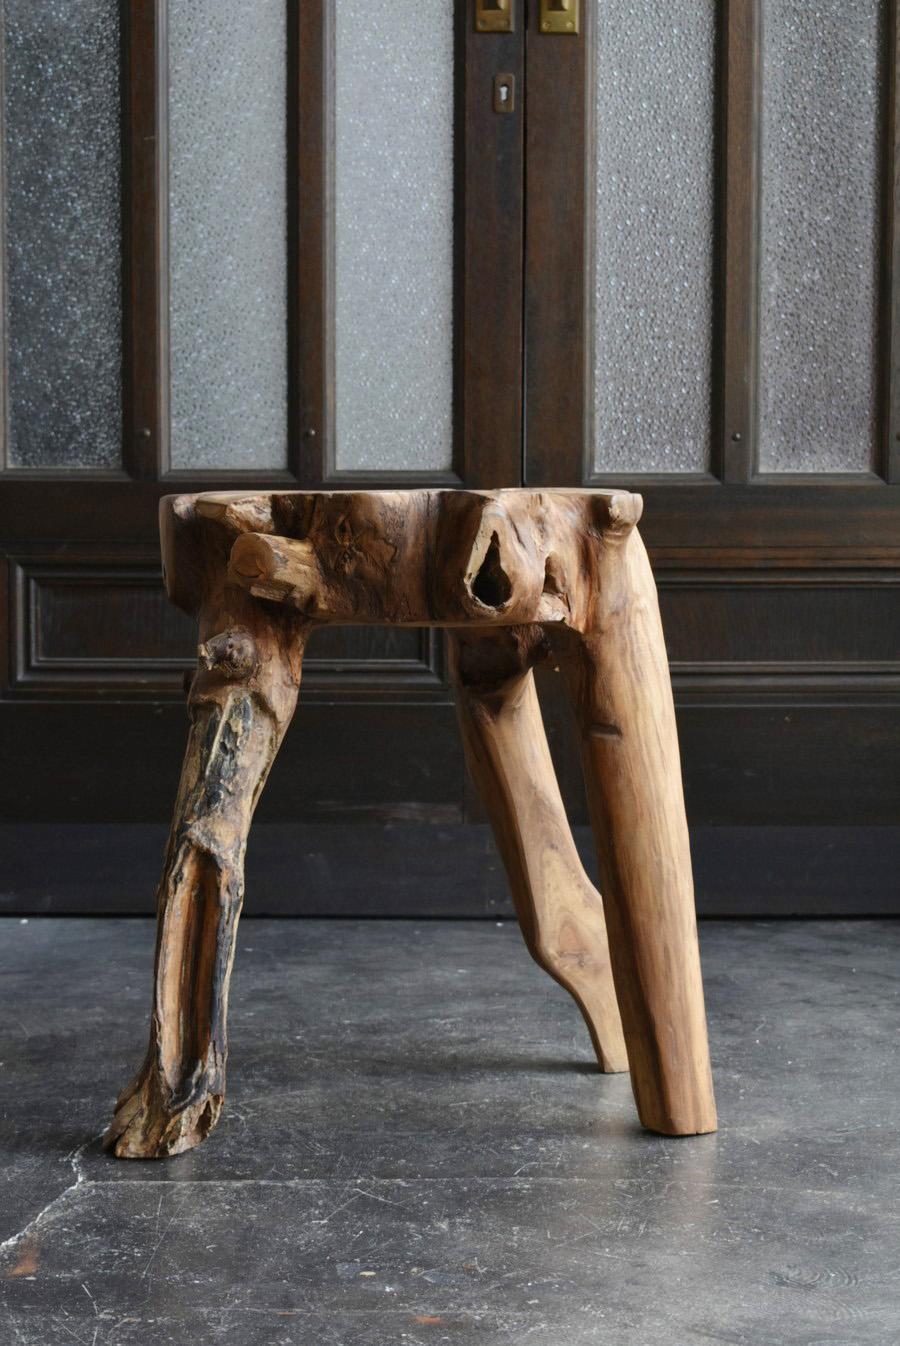 This is a stool made from the roots of a tree, made in Indonesia.
It was made around the 20th century.
The excess parts are scraped off and the parts that will become the legs of the stool are carefully made.
The material used seems to be teak